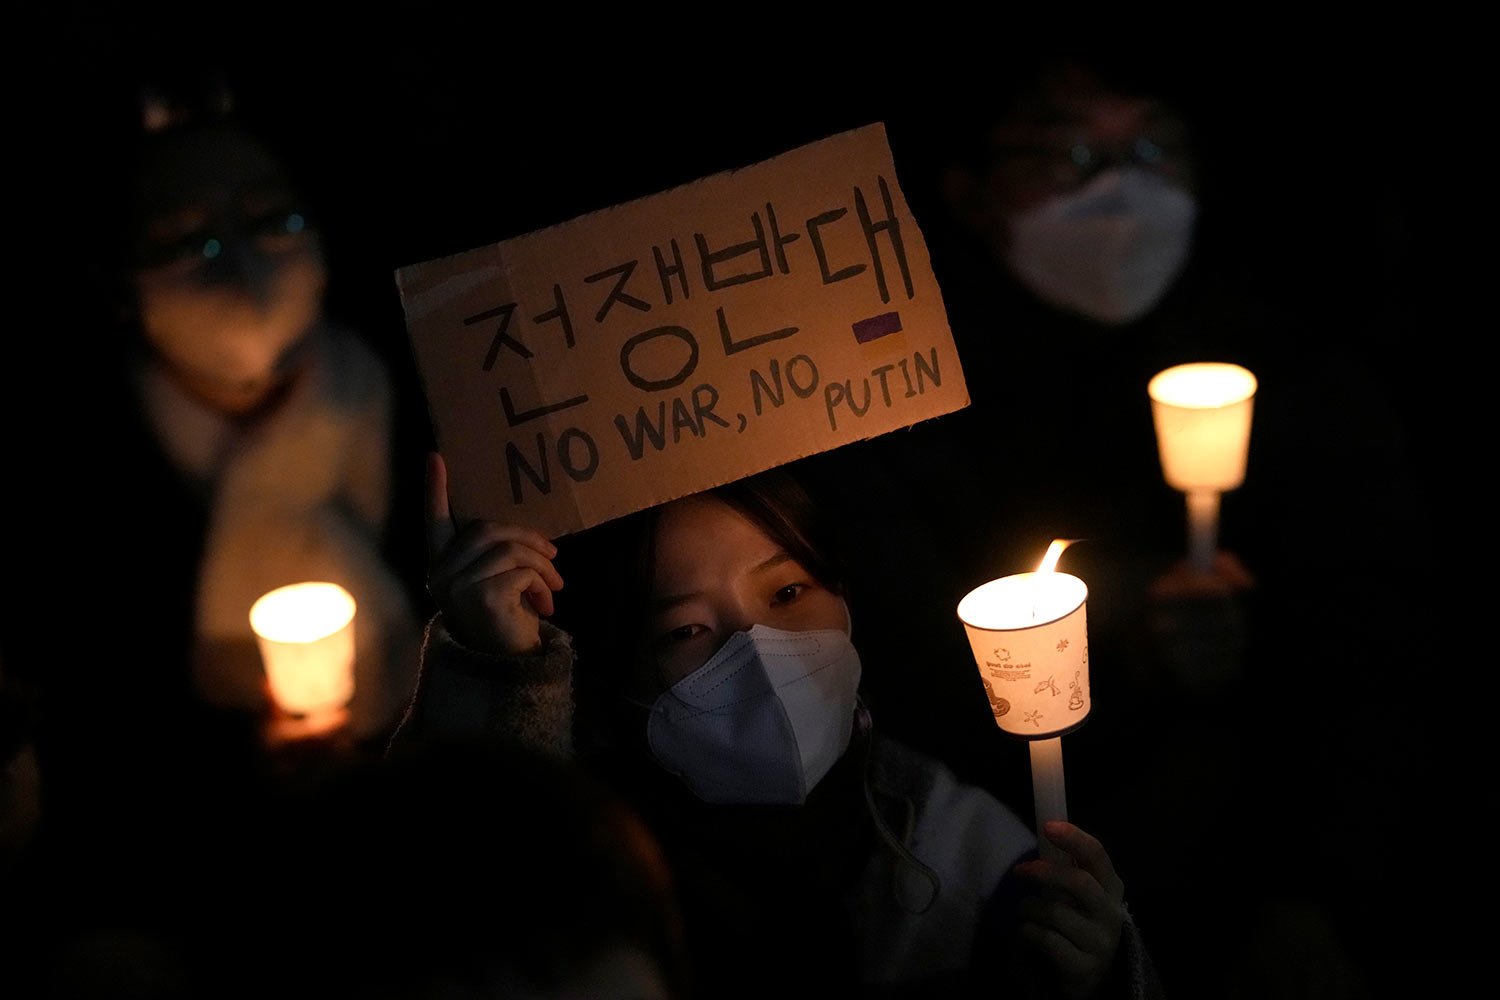  People hold candles during a candlelight vigil supporting Ukraine for peace and safety and demanding to stop the war near the Russia Embassy in Seoul, South Korea, Friday, March 4, 2022. (AP Photo/Lee Jin-man) 